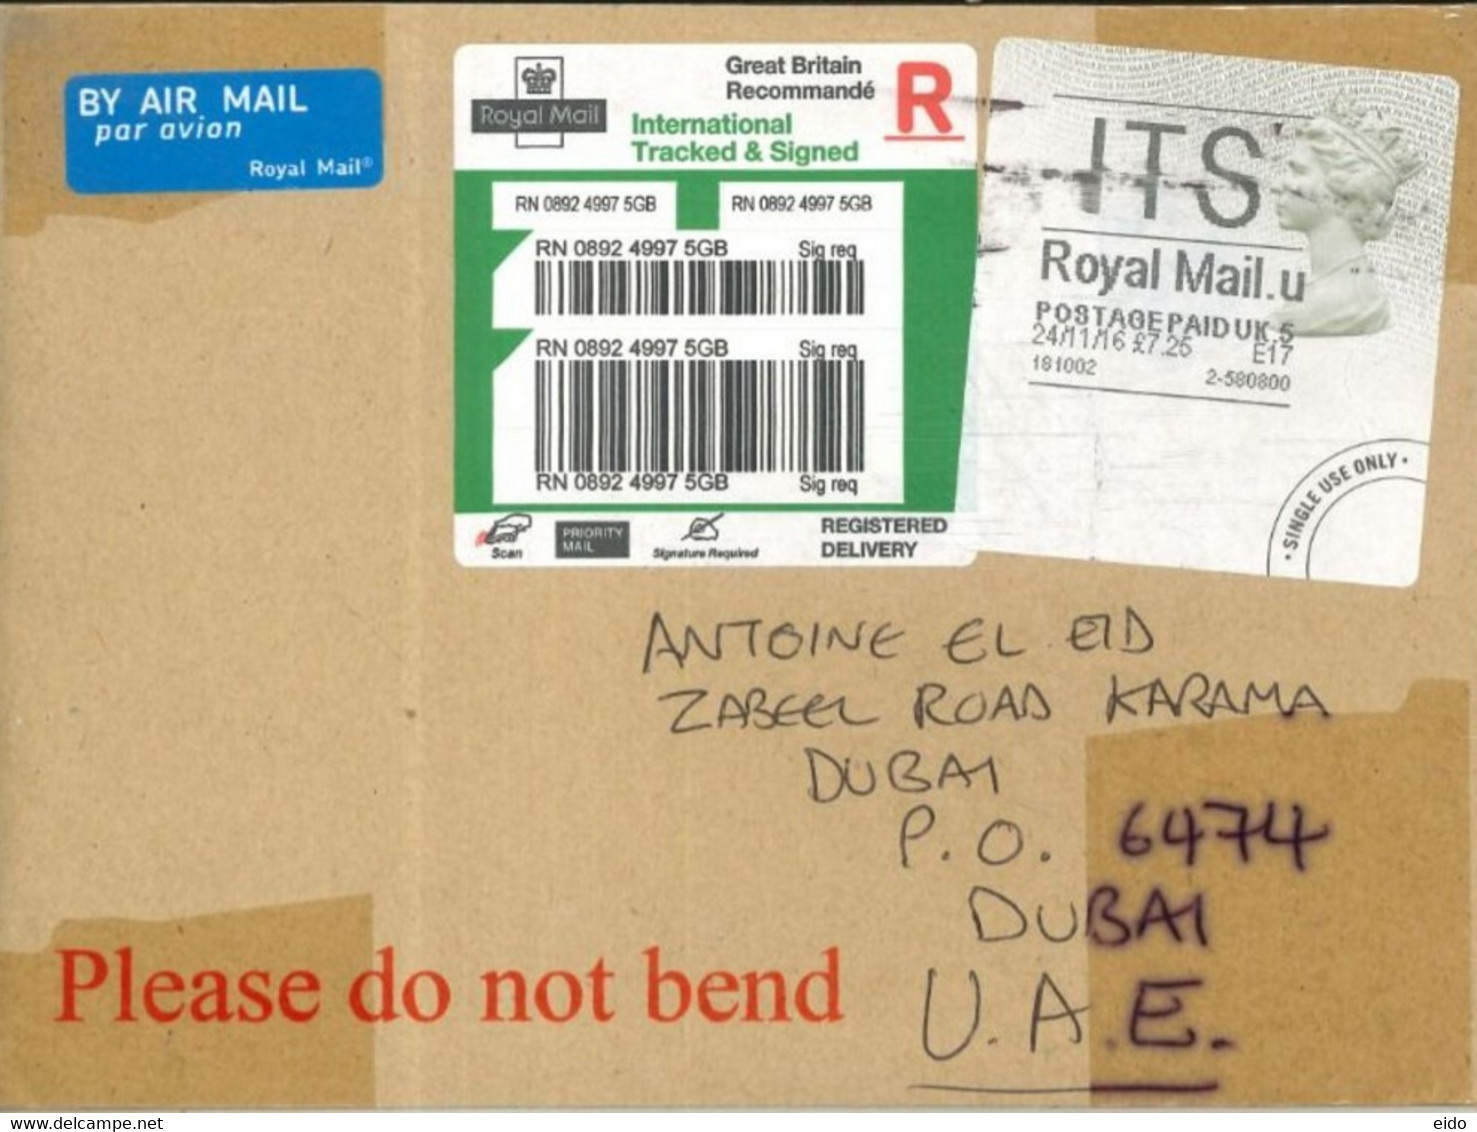 GREAT BRITAIN - 2016 - REGISTERED STAMP LABEL  COVER  TO DUBAI. - Universal Mail Stamps